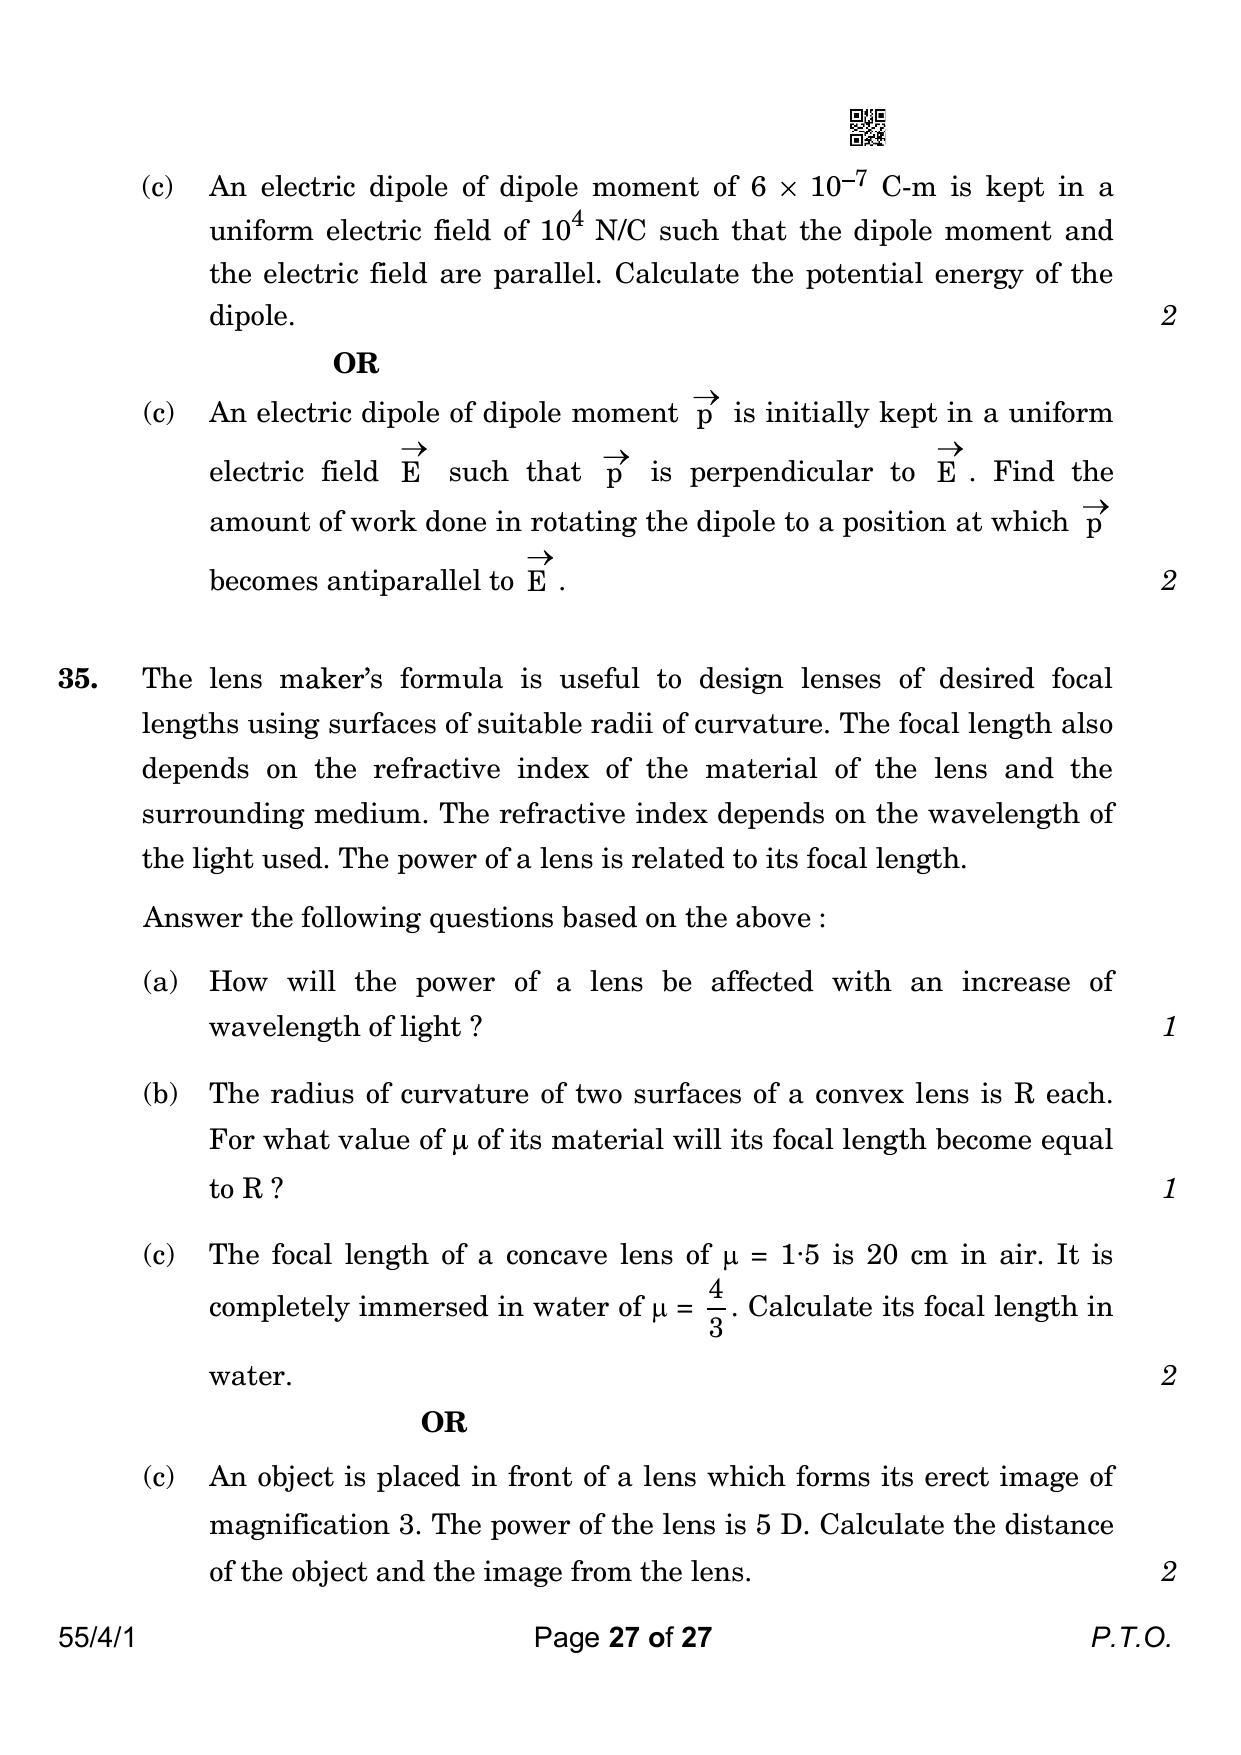 CBSE Class 12 55-4-1 Physics 2023 Question Paper - Page 27